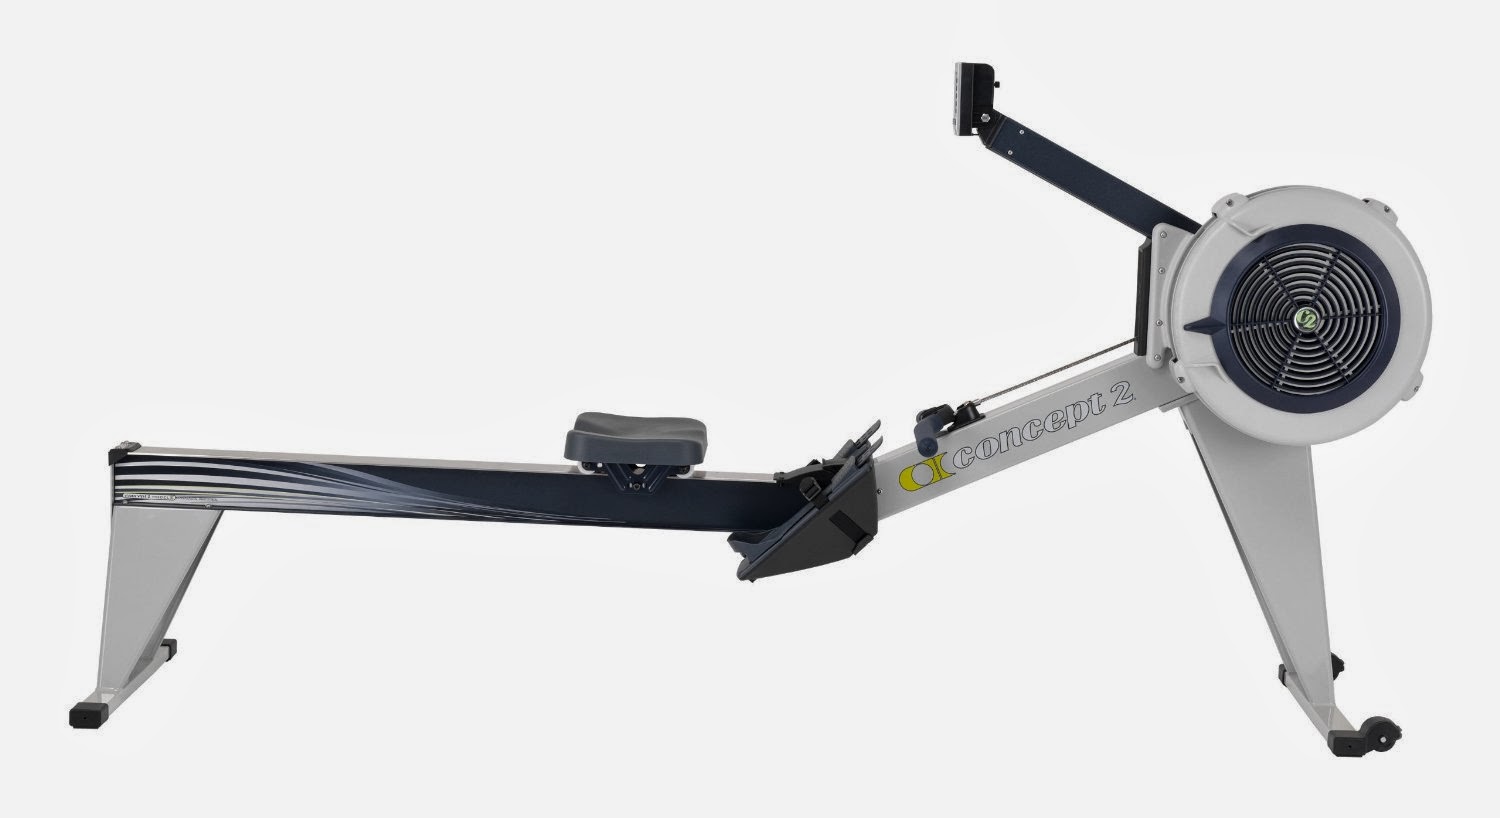 Concept 2 Model E Indoor Rowing Machine, picture, review features & specifications, compare with Concept 2 Model D